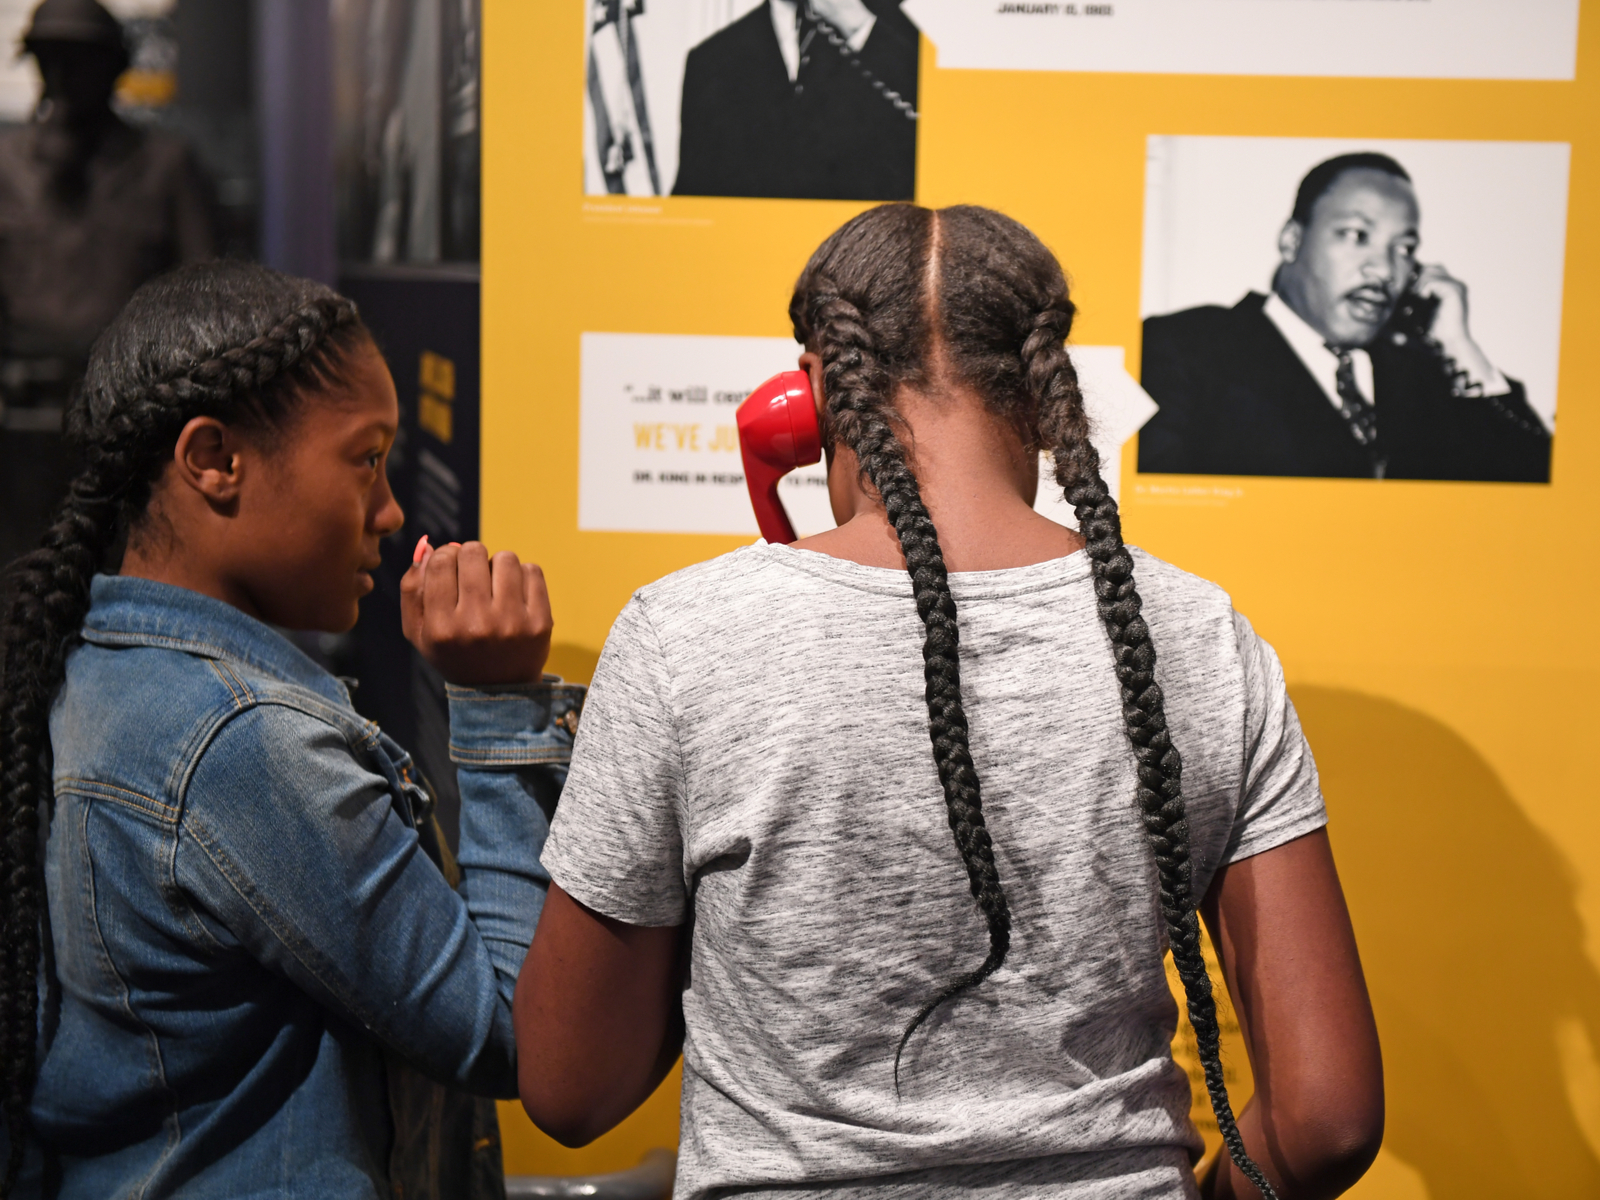 Kids at the San Antonio African American Museum, one of the best things to do in San Antonio